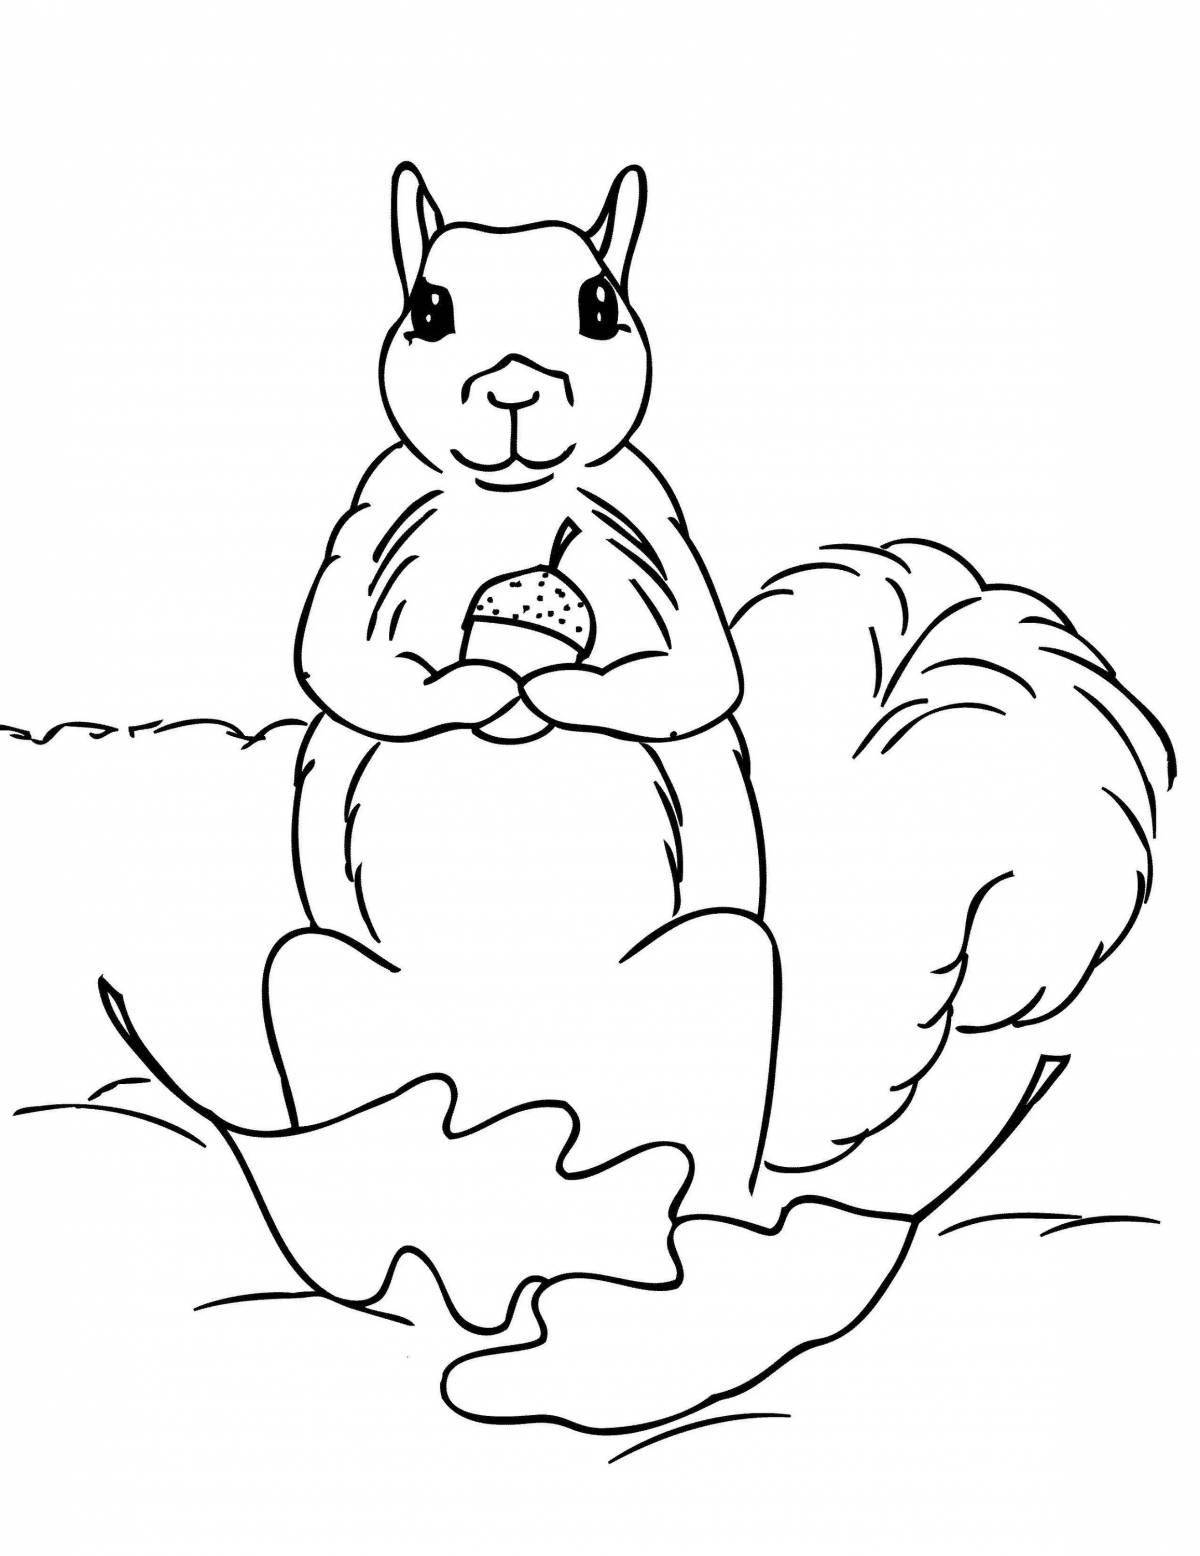 Naughty squirrel coloring